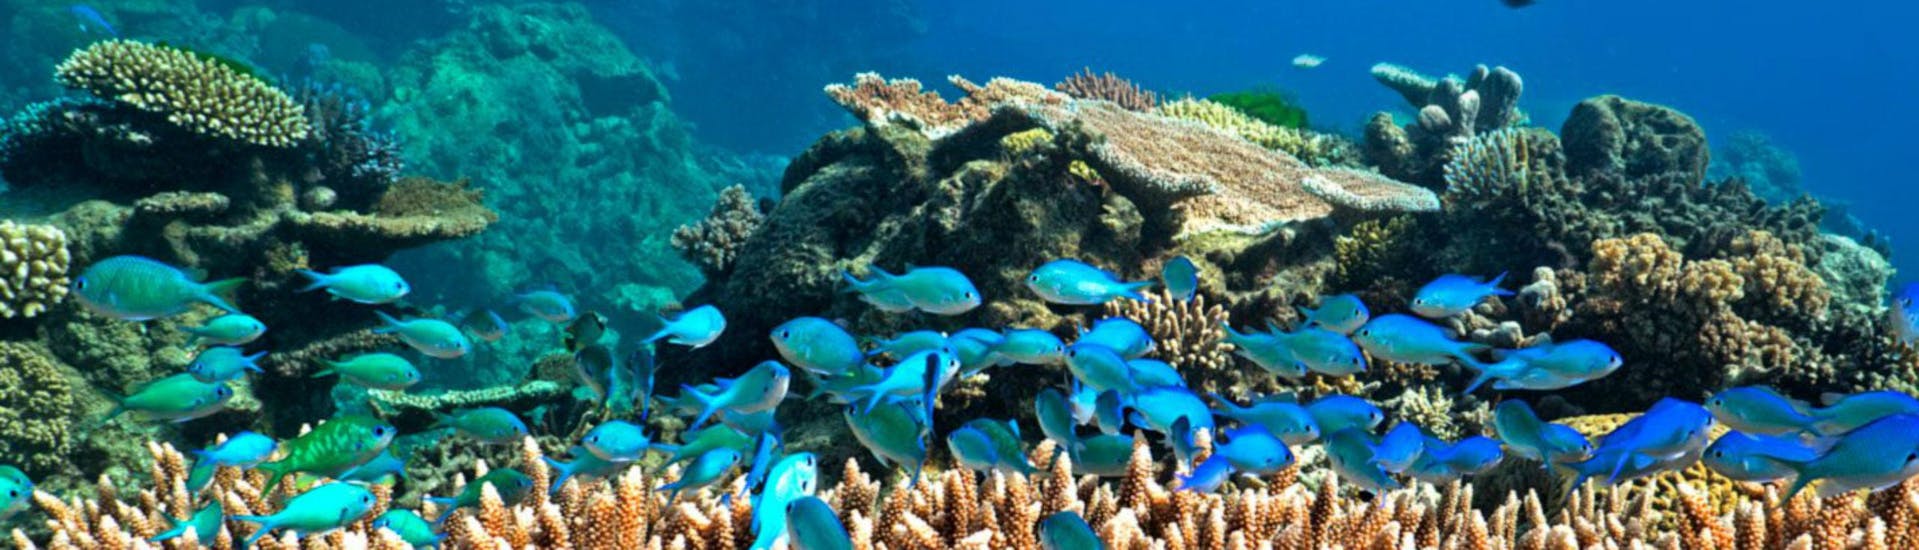 A shoal of blue fish is swimming around the coral reef, as can be seen while Scuba Diving at the Great Barrier Reef for Certified Divers with Ocean Free.